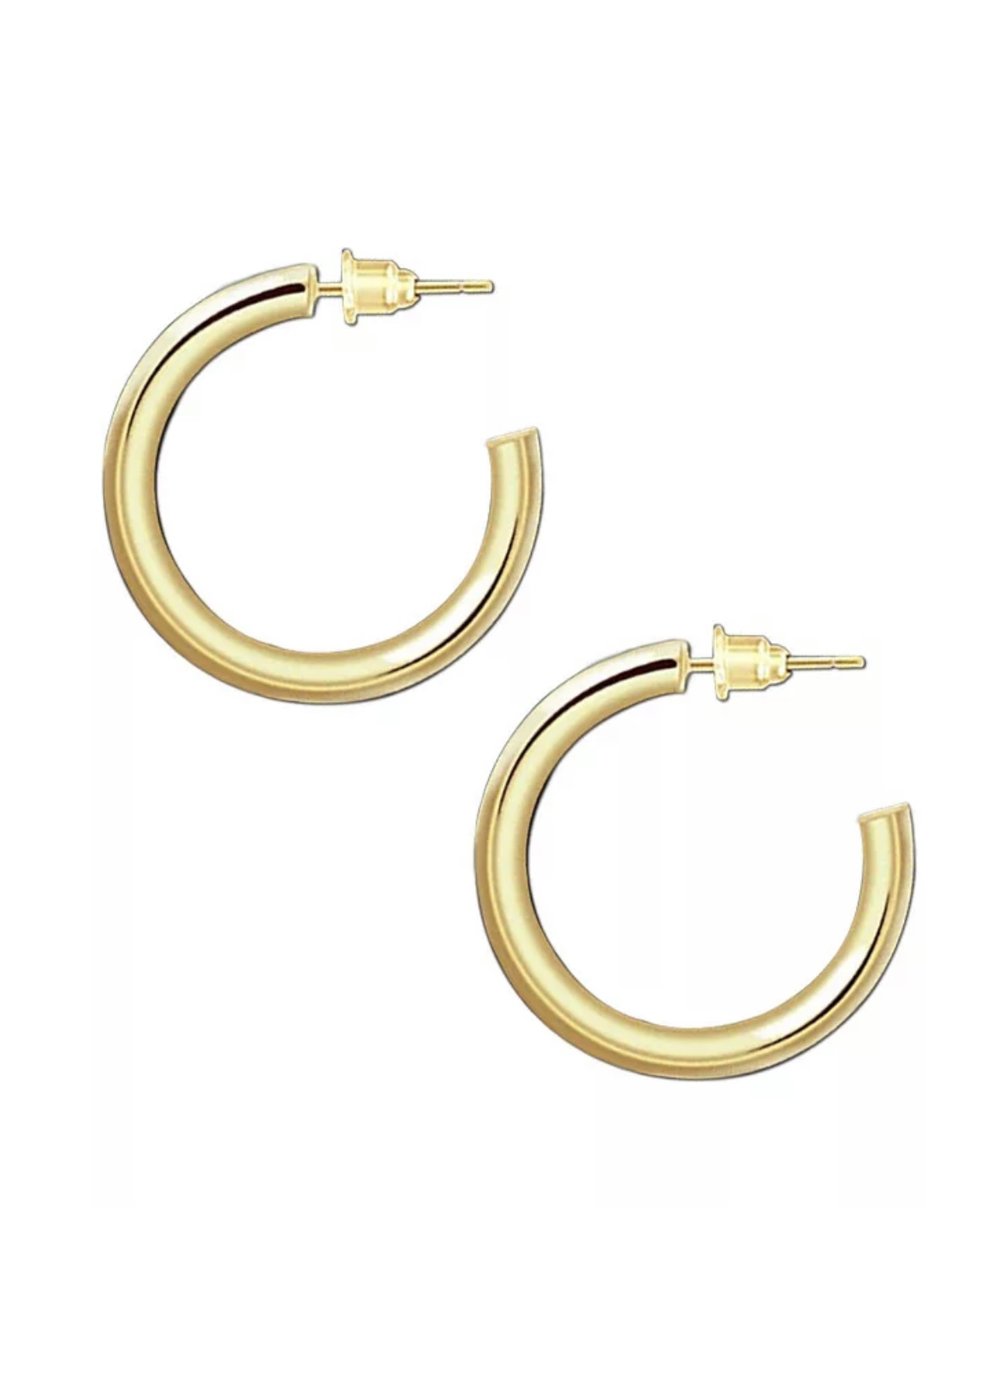 The Small Gold Hoops